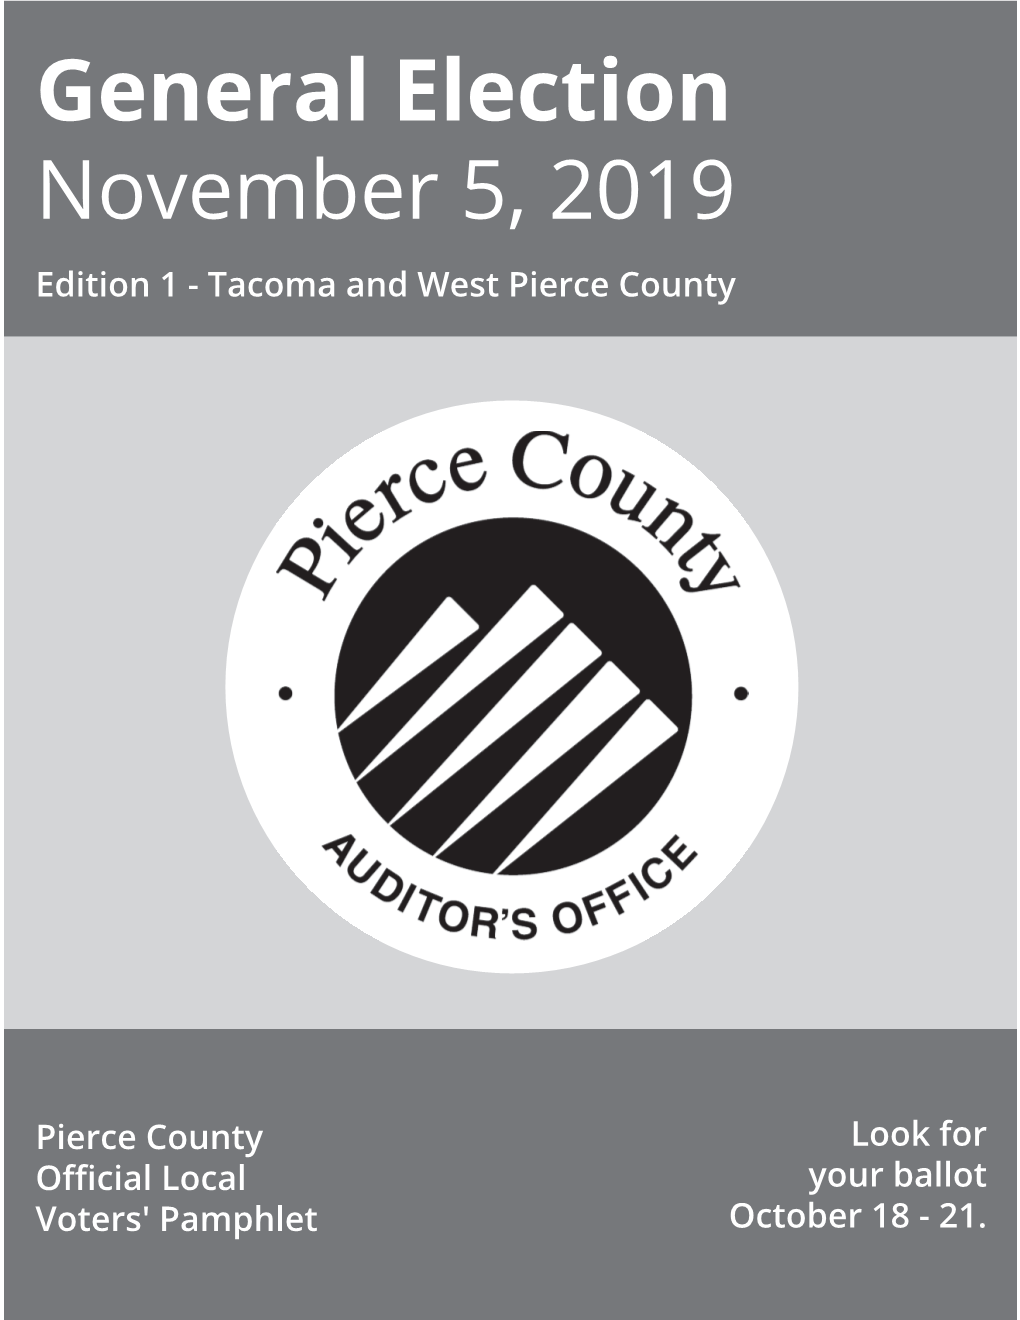 General Election November 5, 2019 Edition 1 - Tacoma and West Pierce County